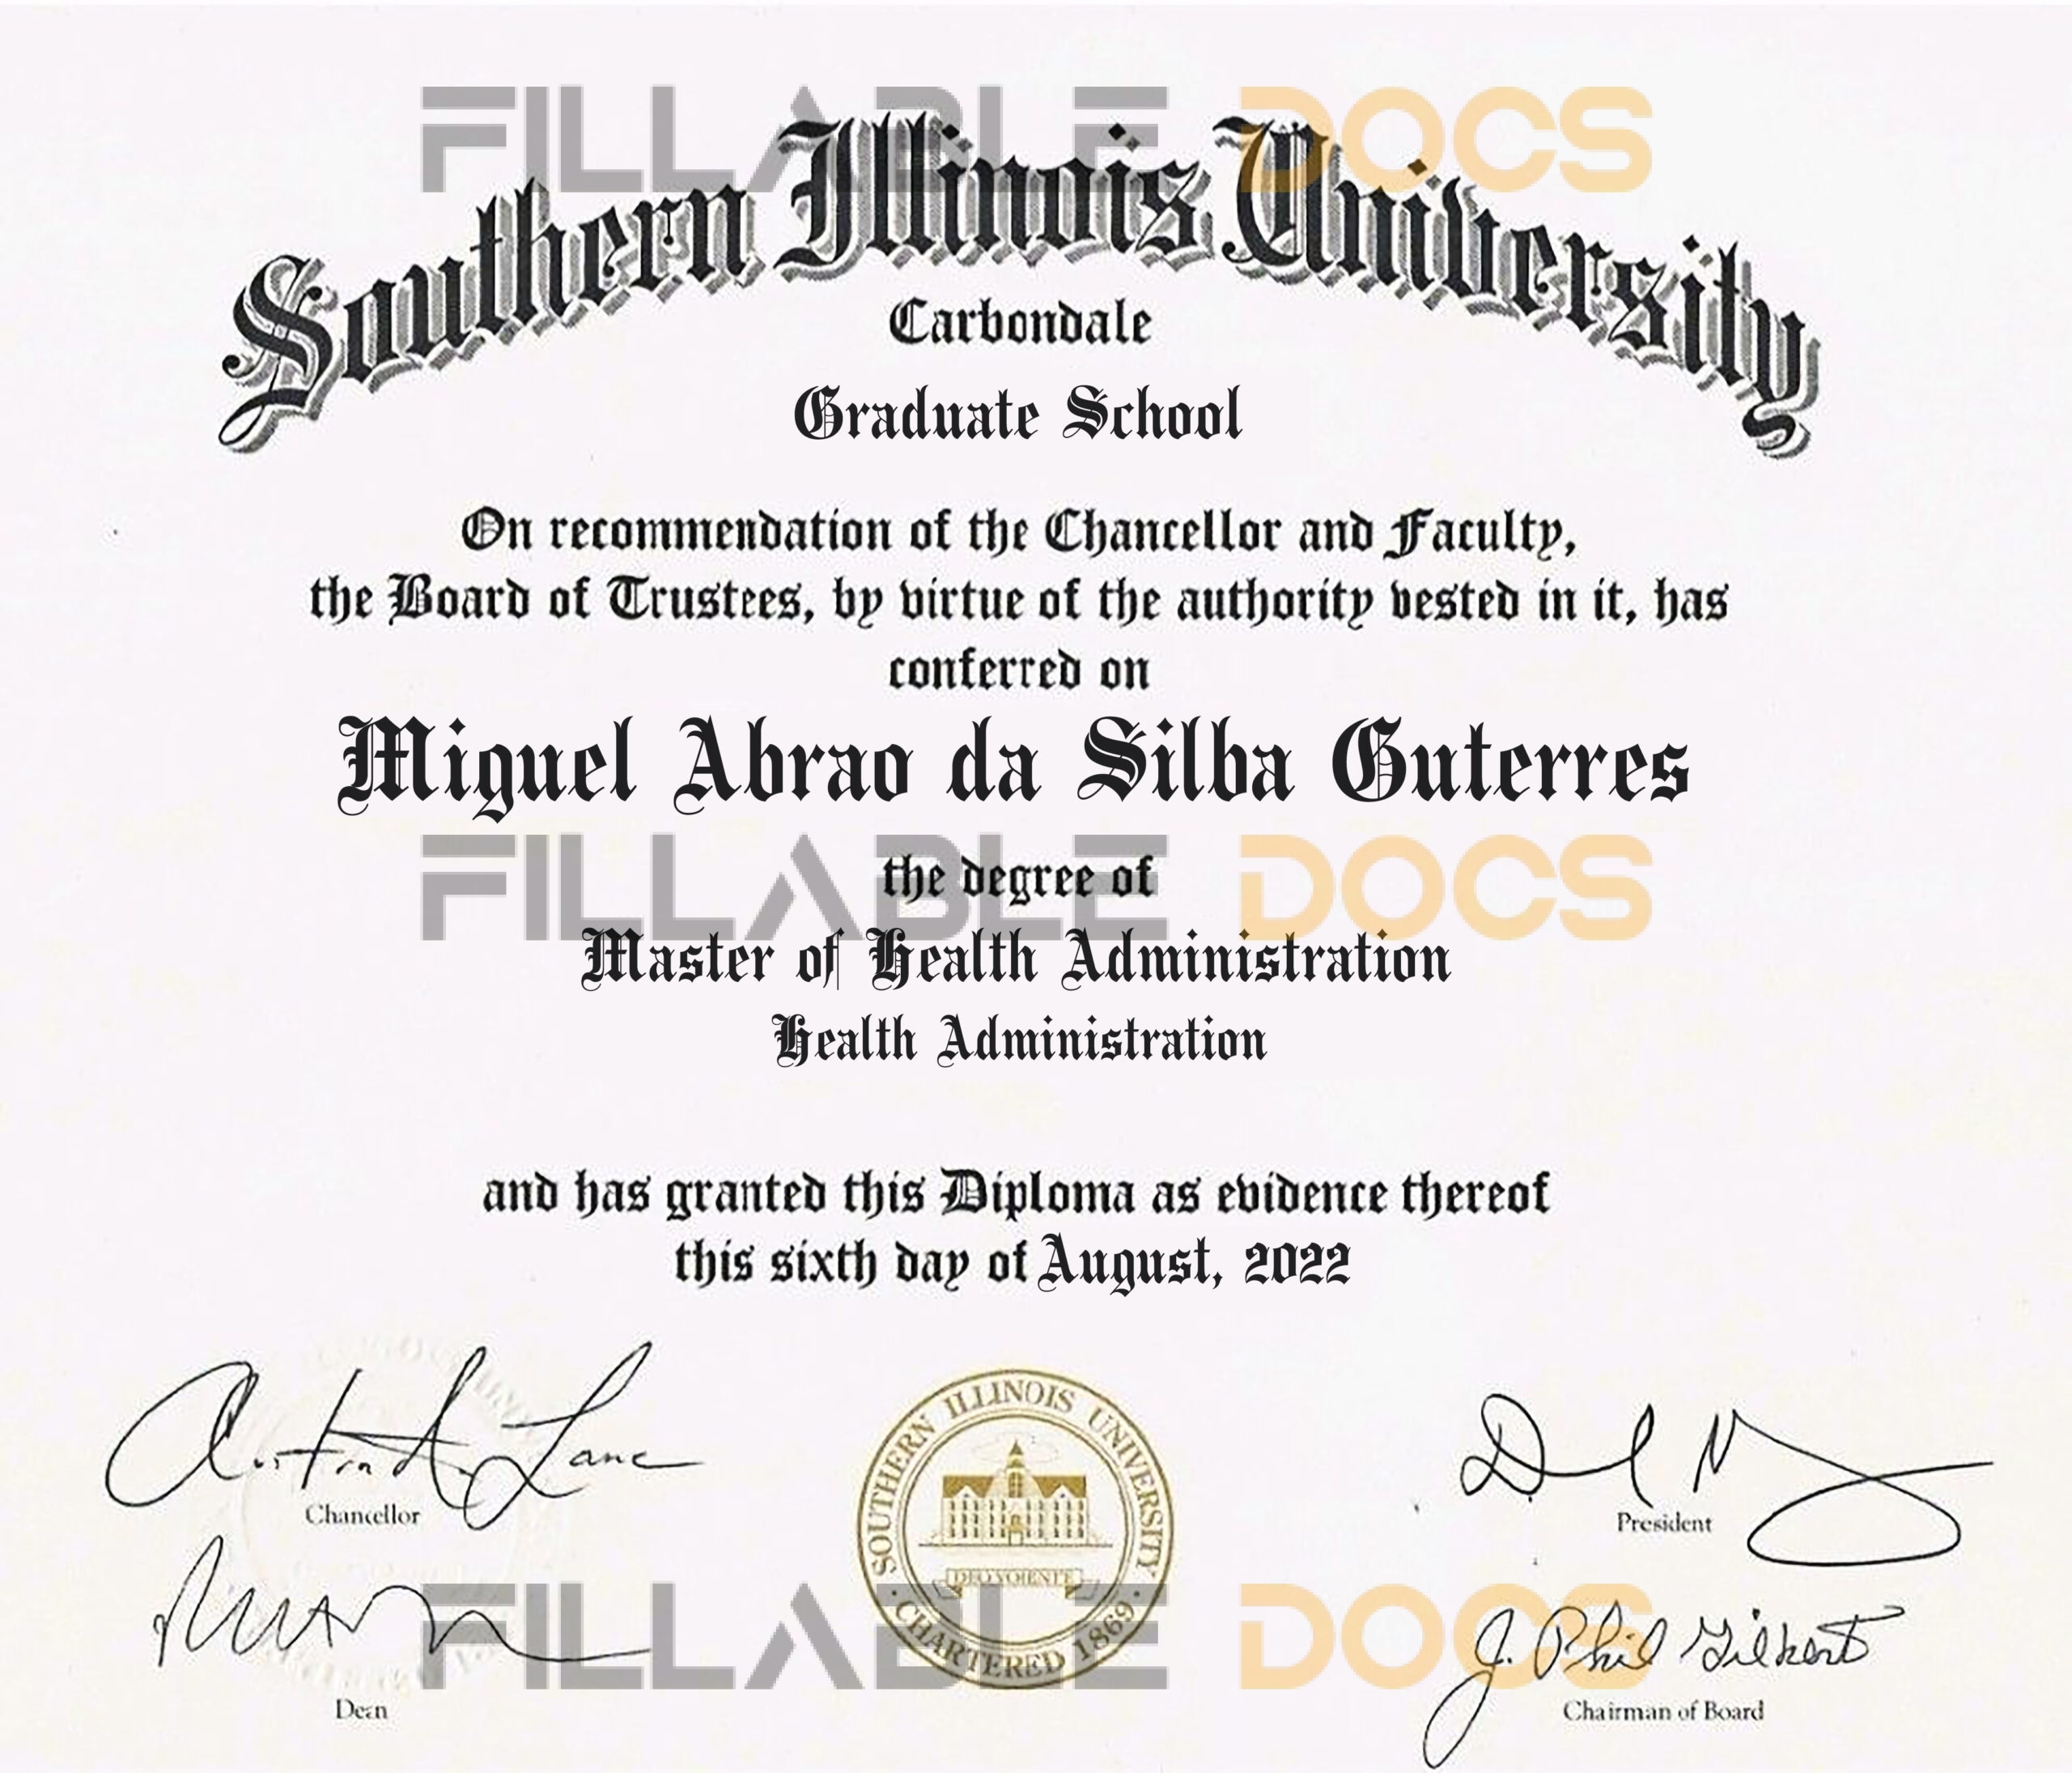 Authentic-Looking Fake certificate from Southern Illinois University Carbondale